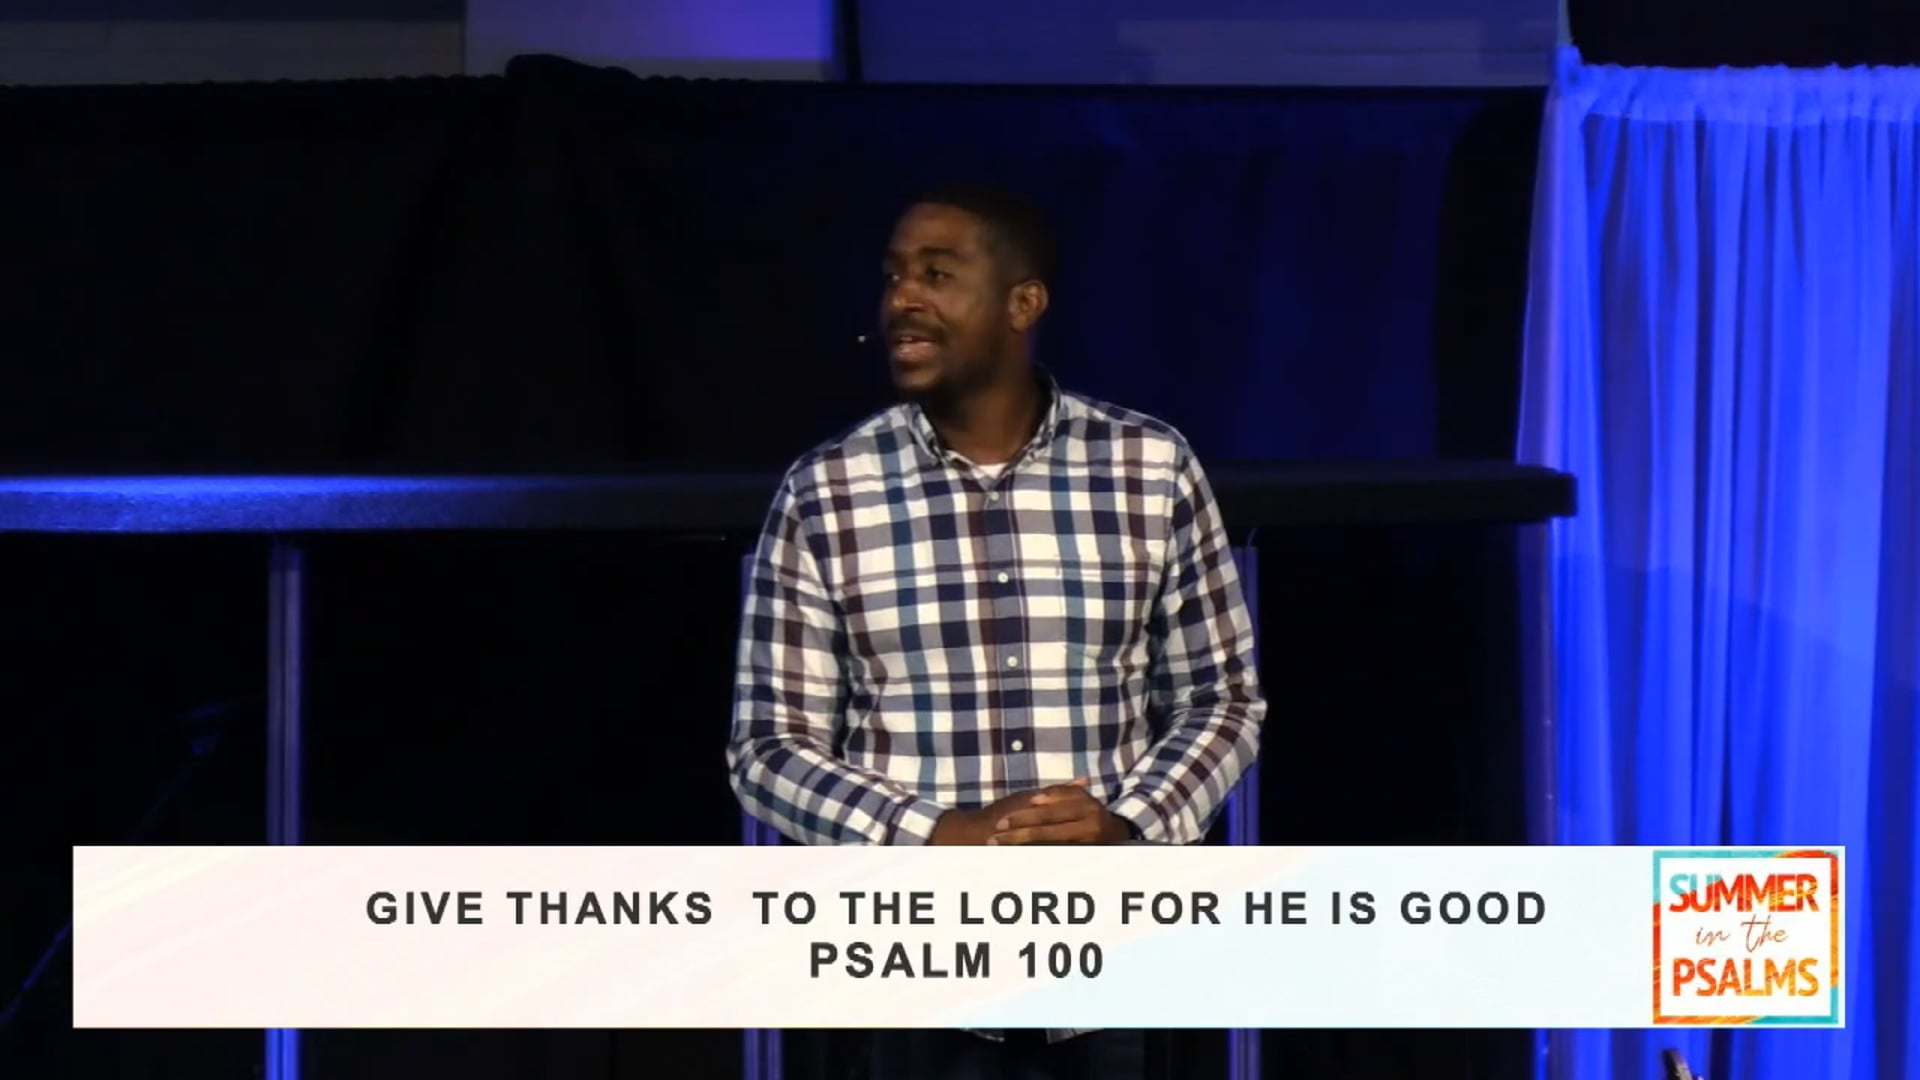 Summer in the Psalms: Give Thanks to the Lord for He is Good-Pastor Eli Byrd 7-24-22.mp4